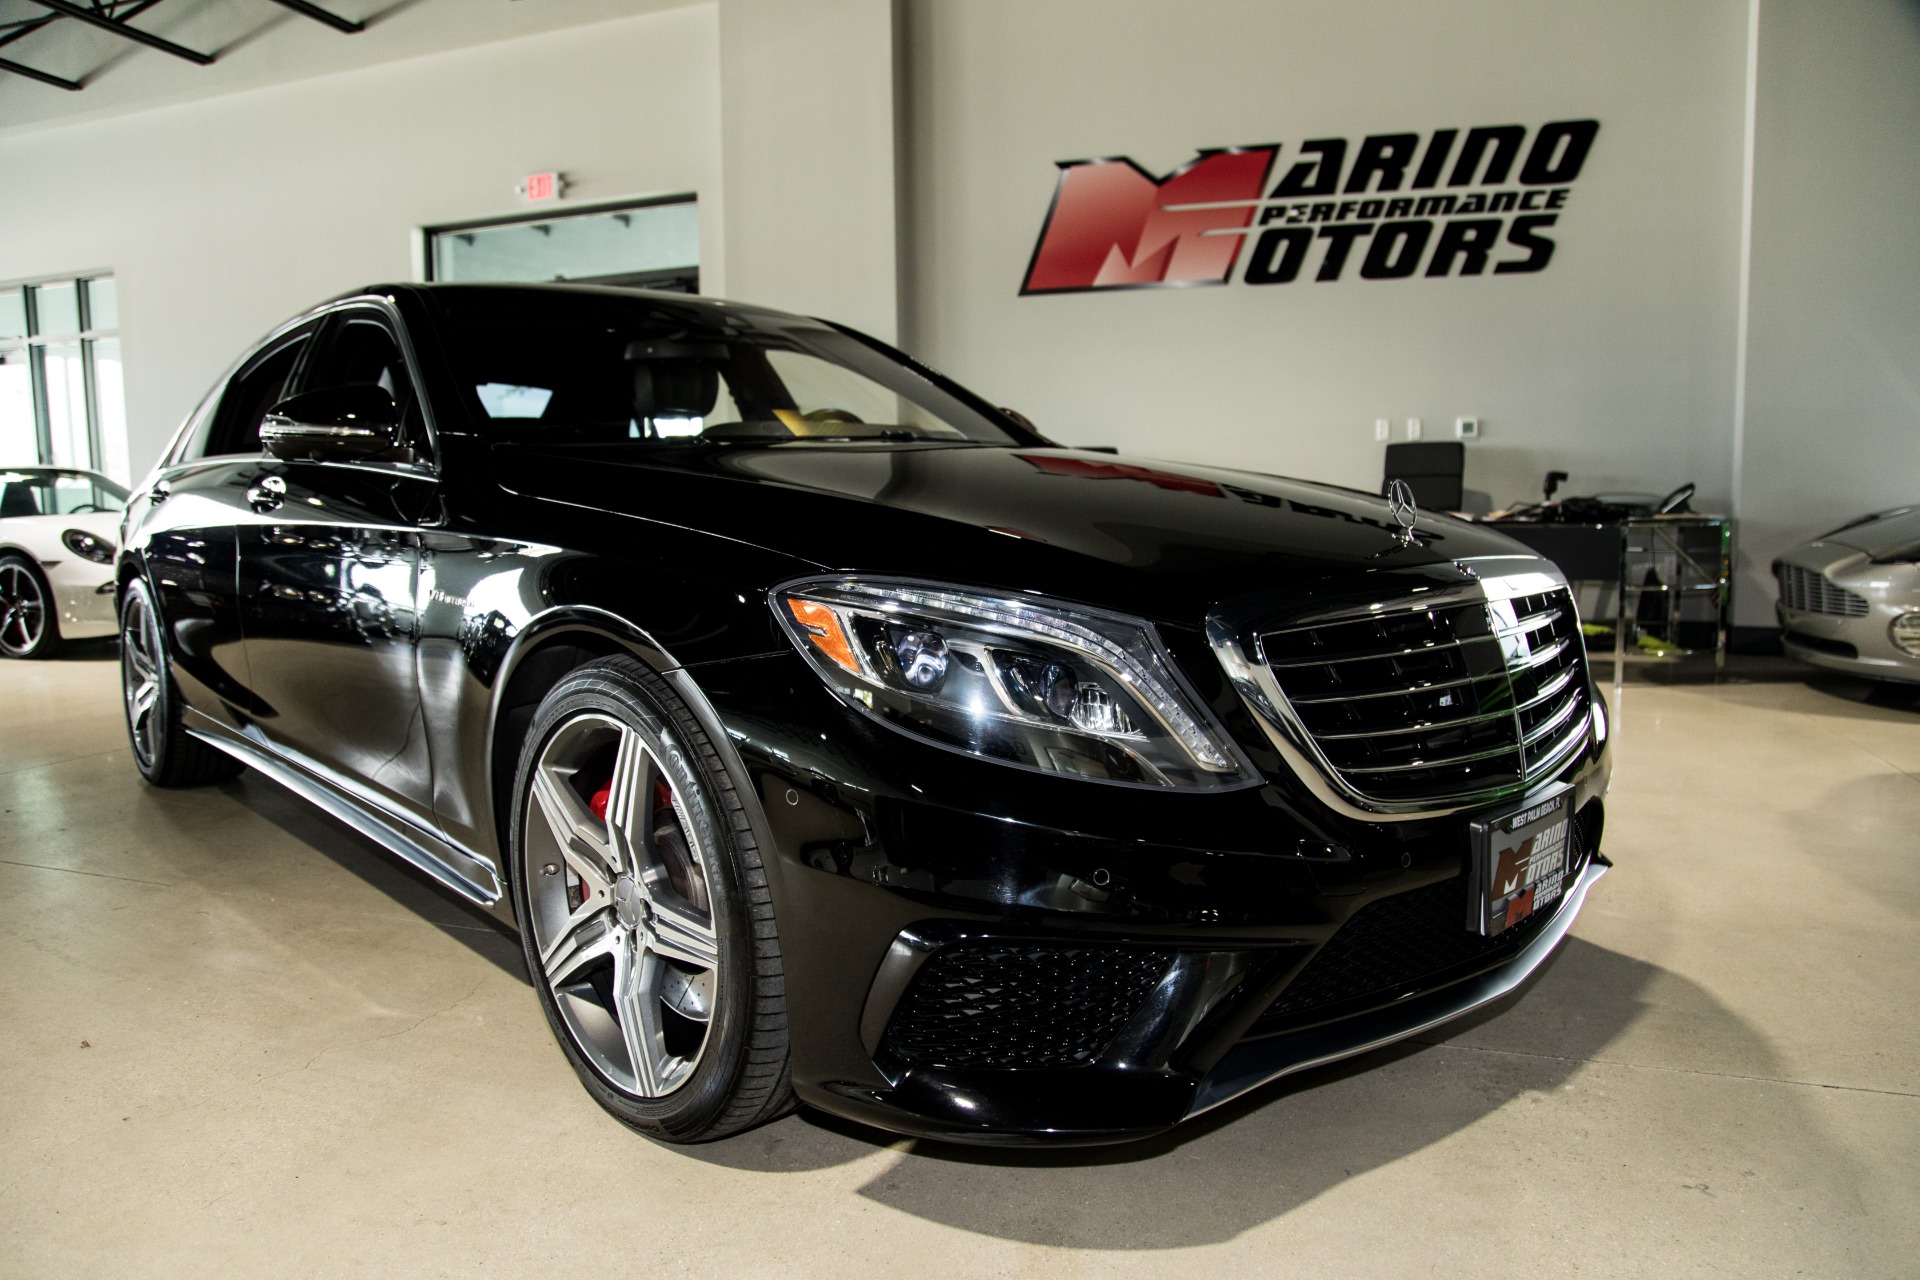 Used 2015 Mercedes-Benz S-Class S 63 AMG For Sale ($82,900) | Marino Performance Motors Stock ...